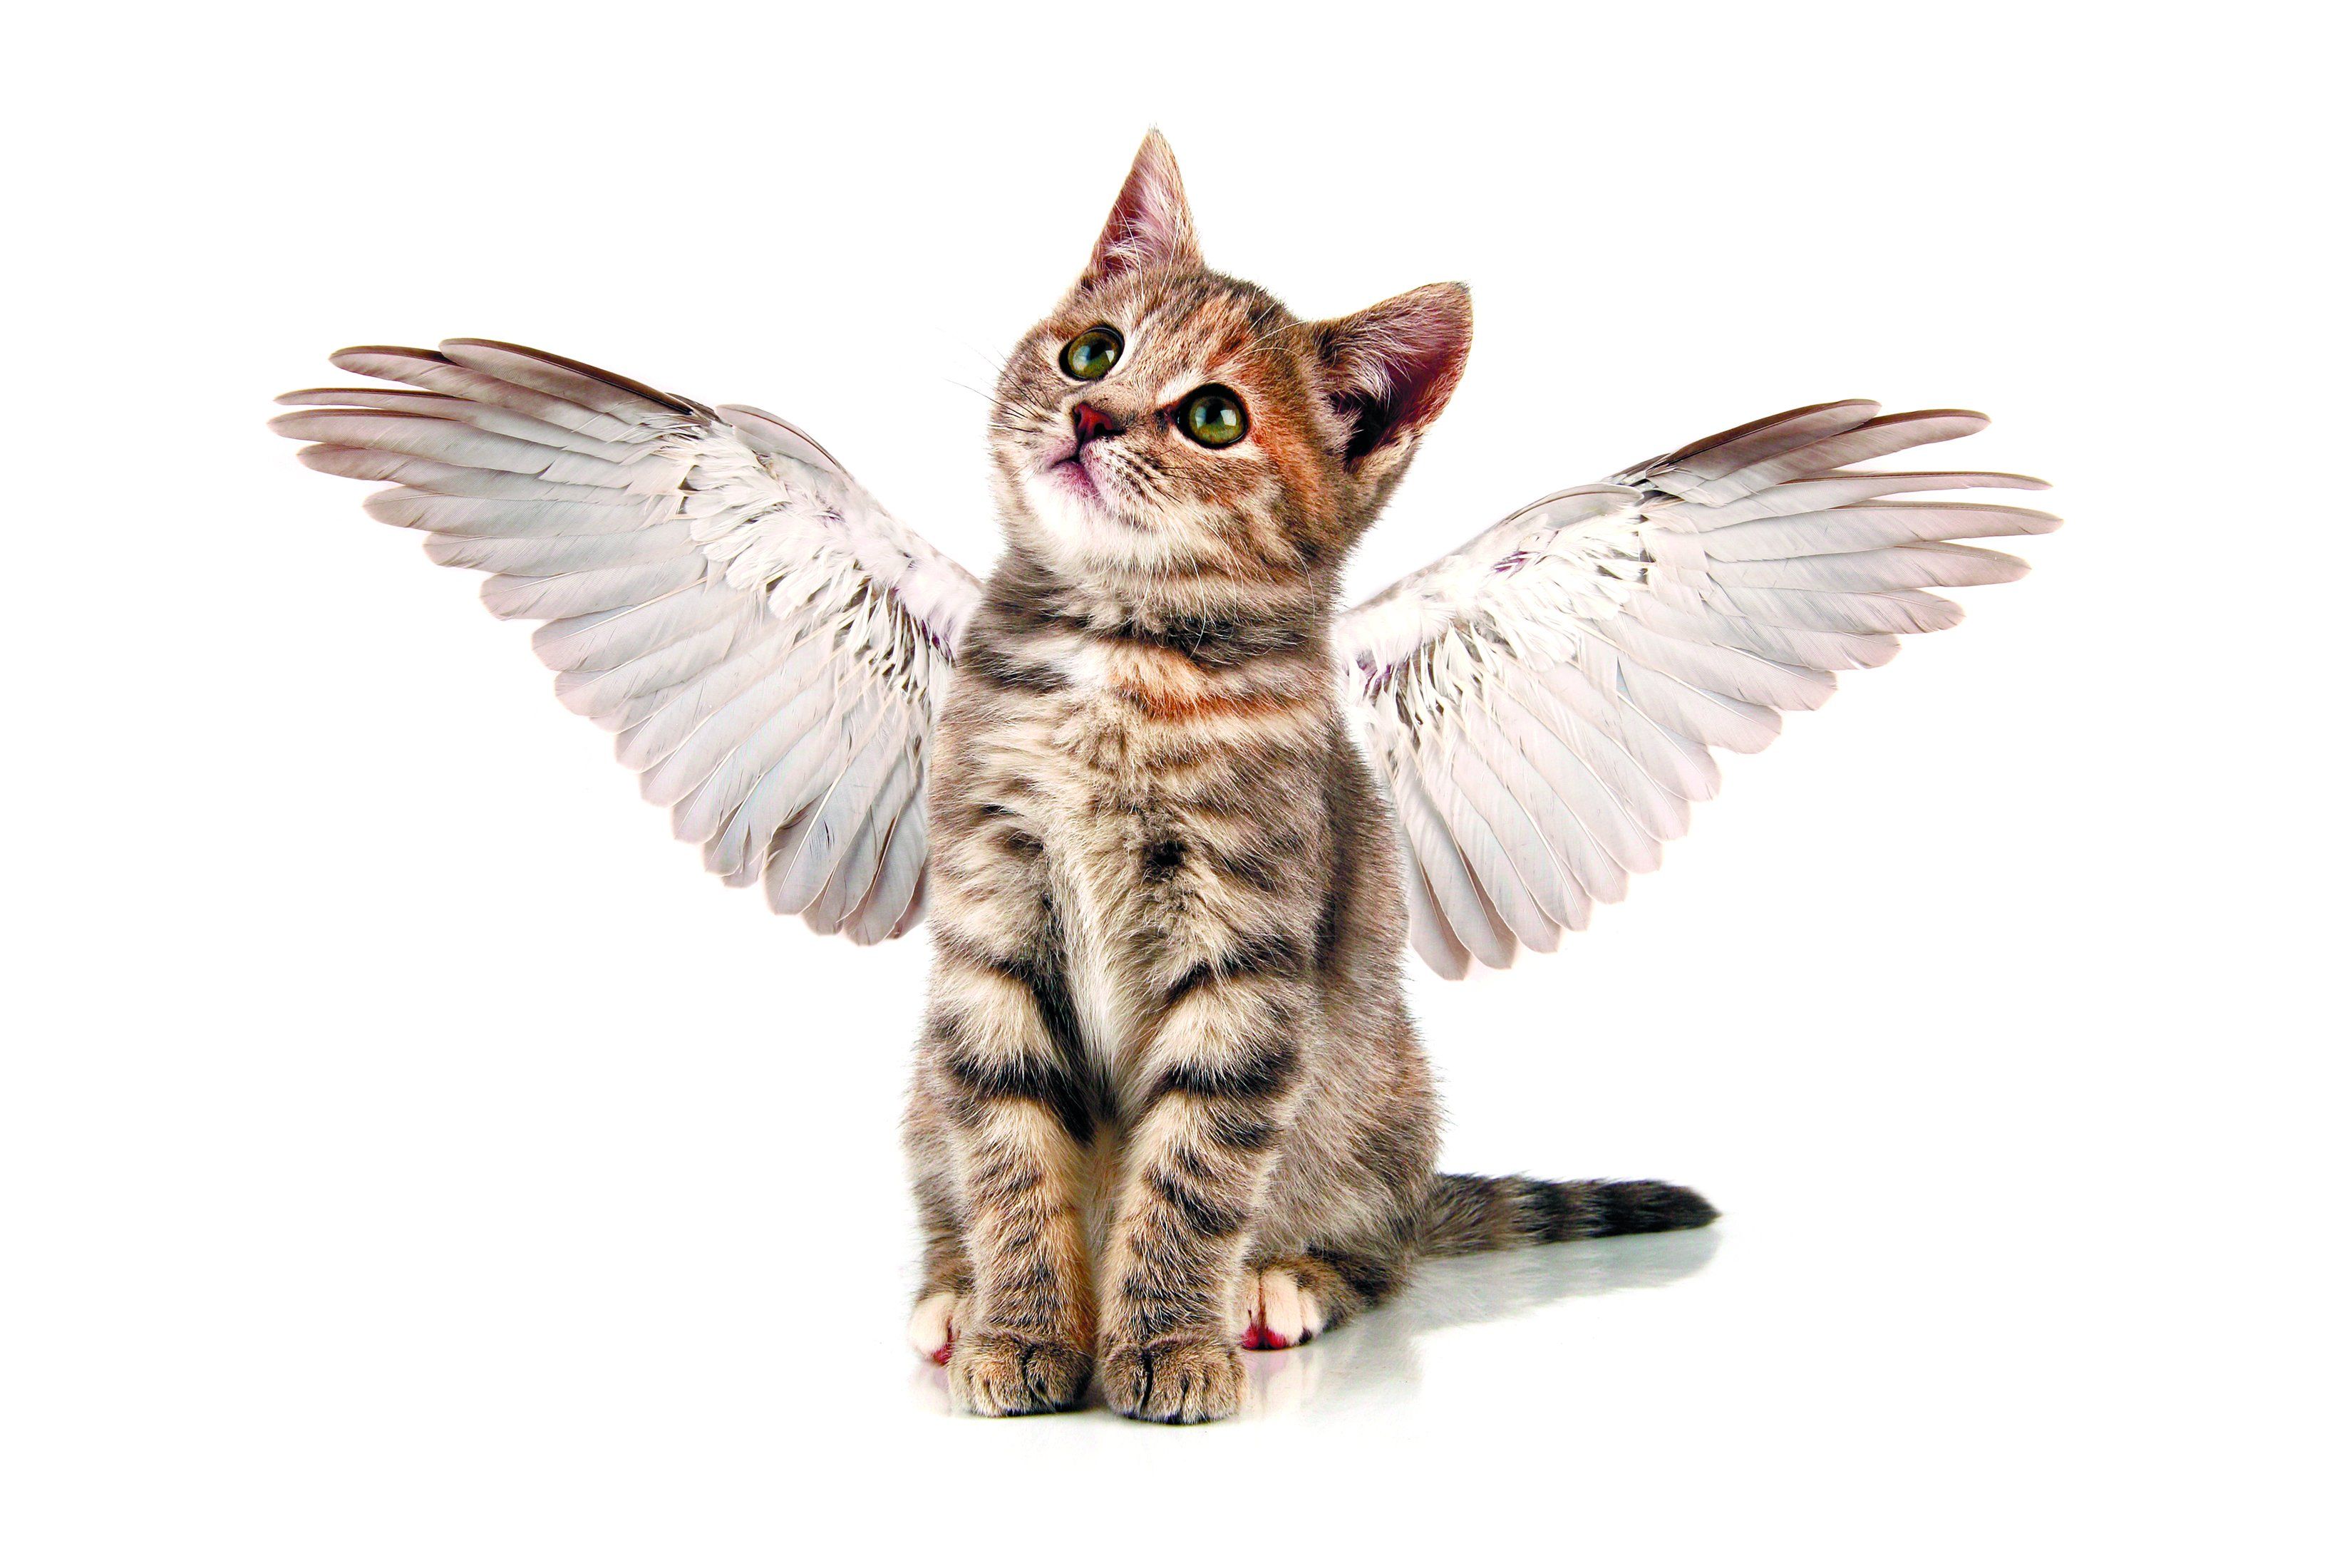 Winged Cats Art Wallpapers